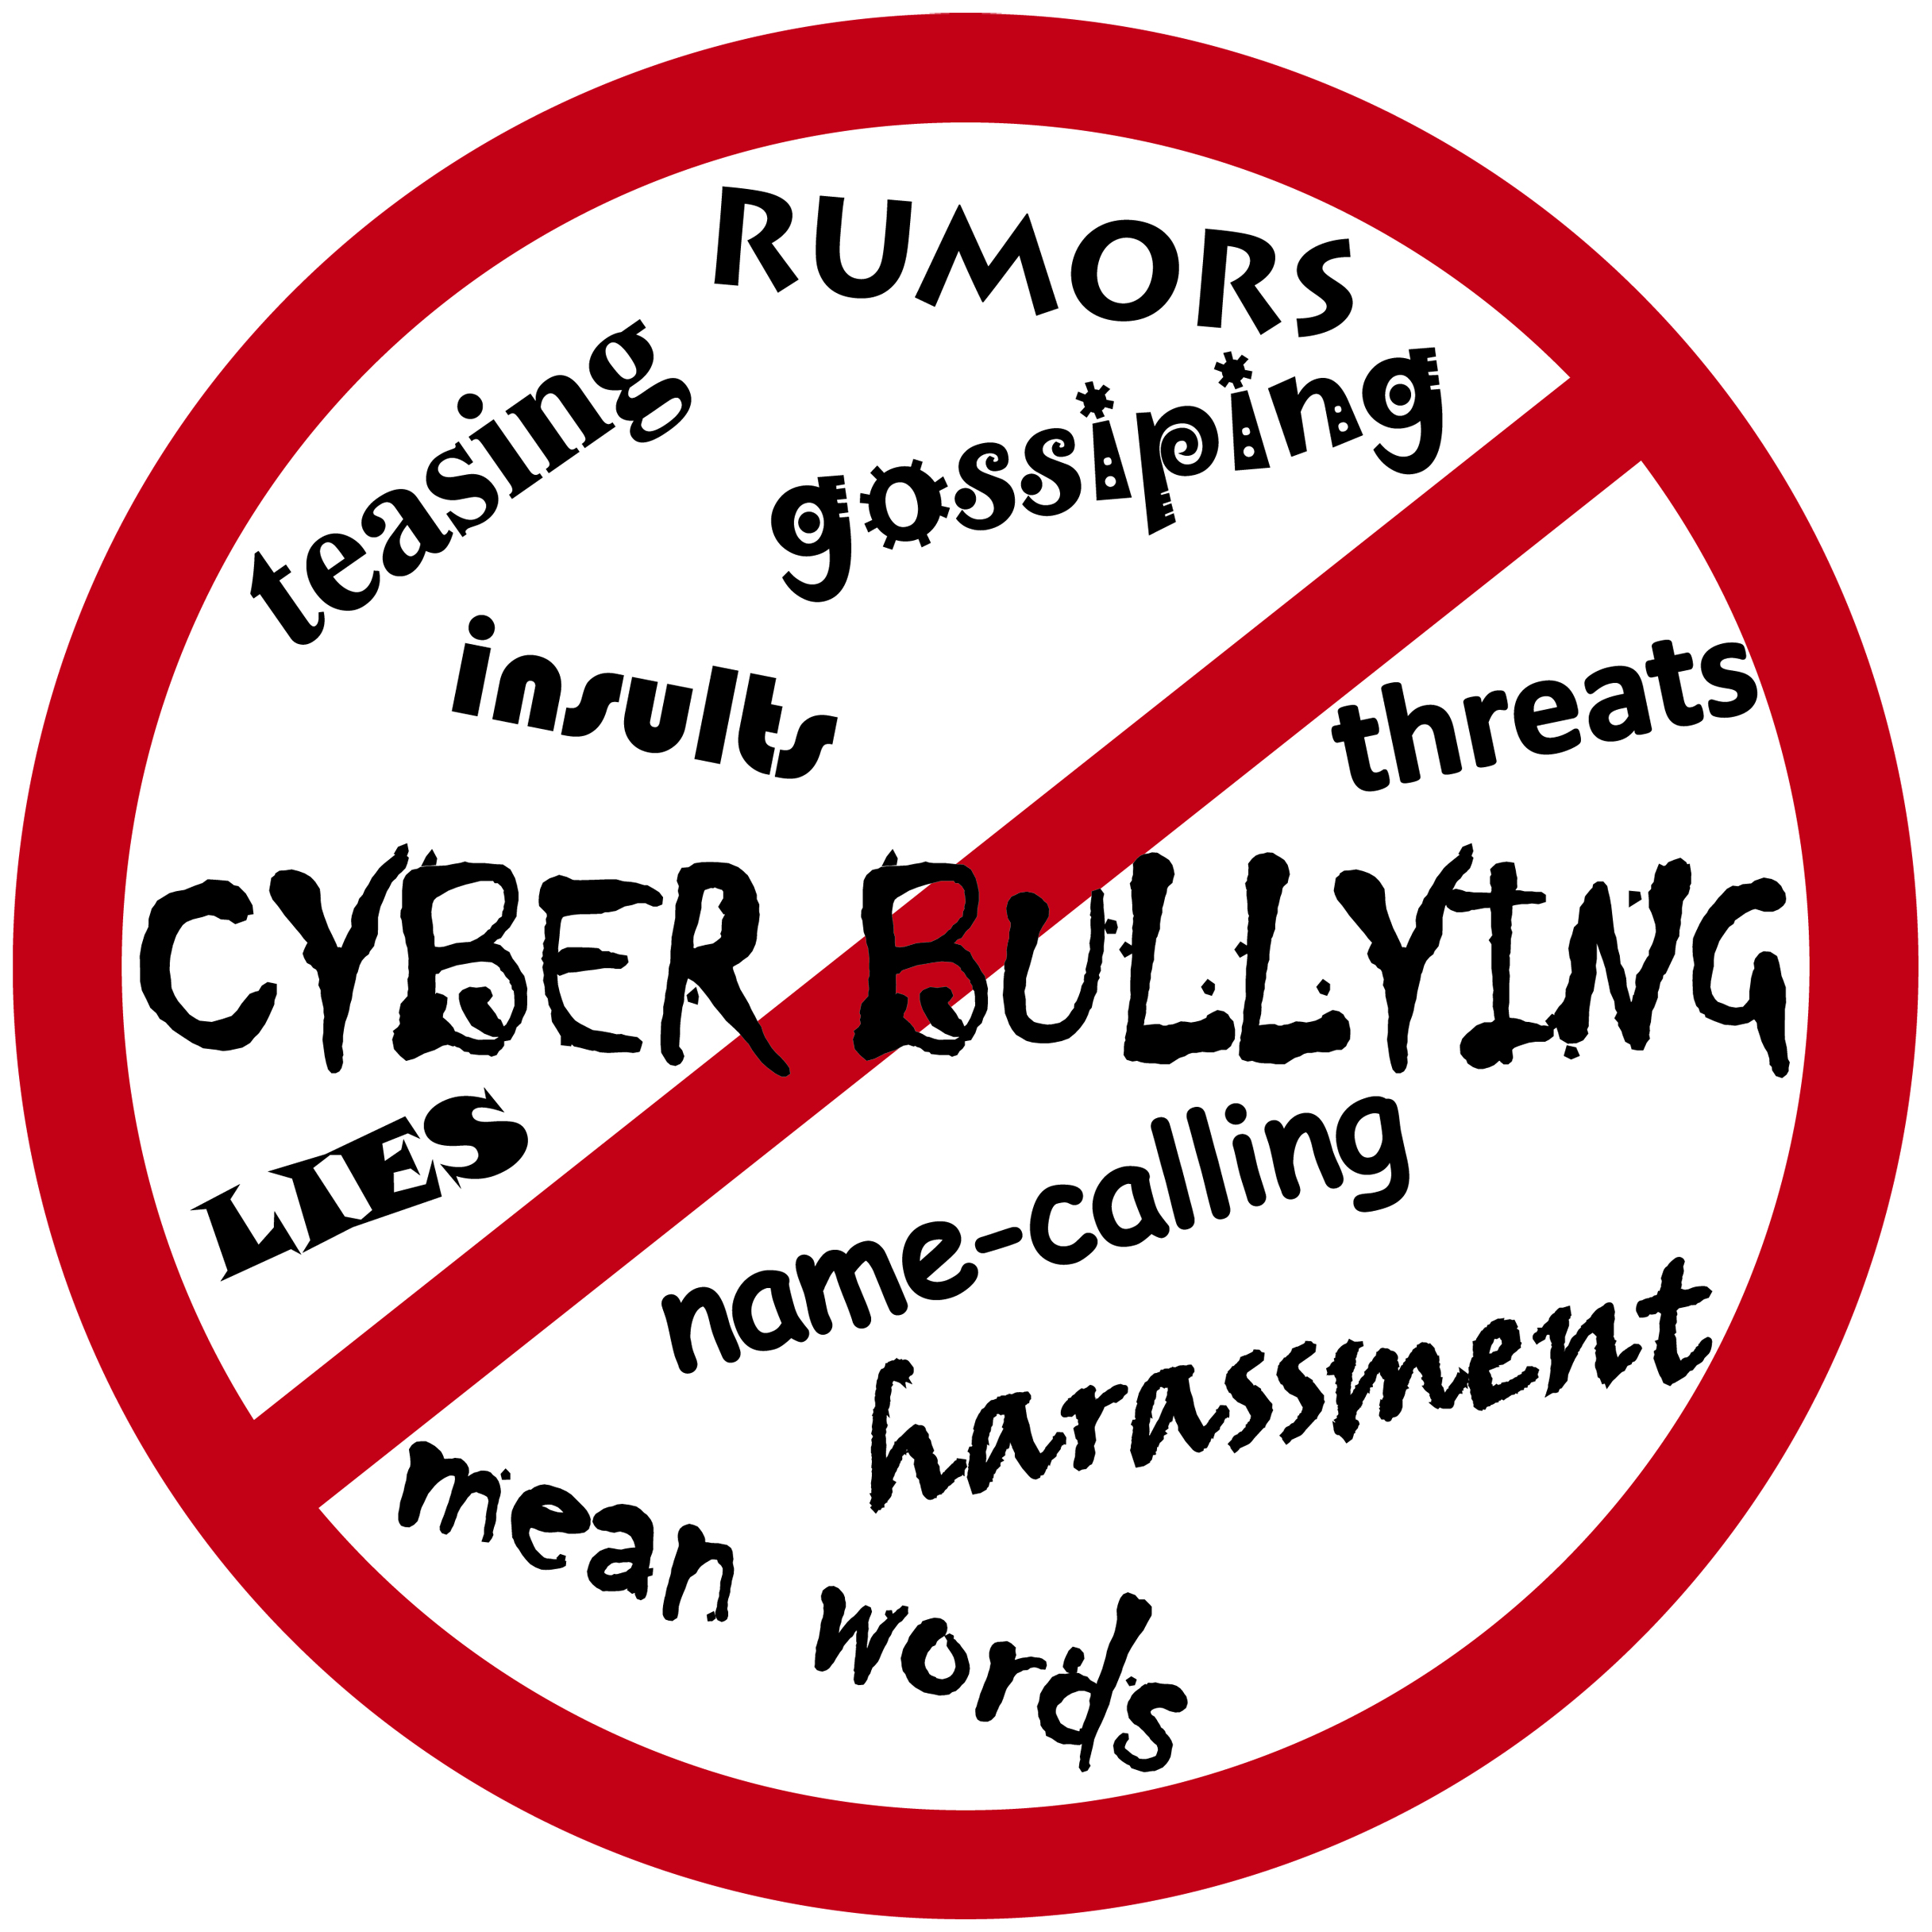 cyberbullying: what is it and how to stop it – @callersmart